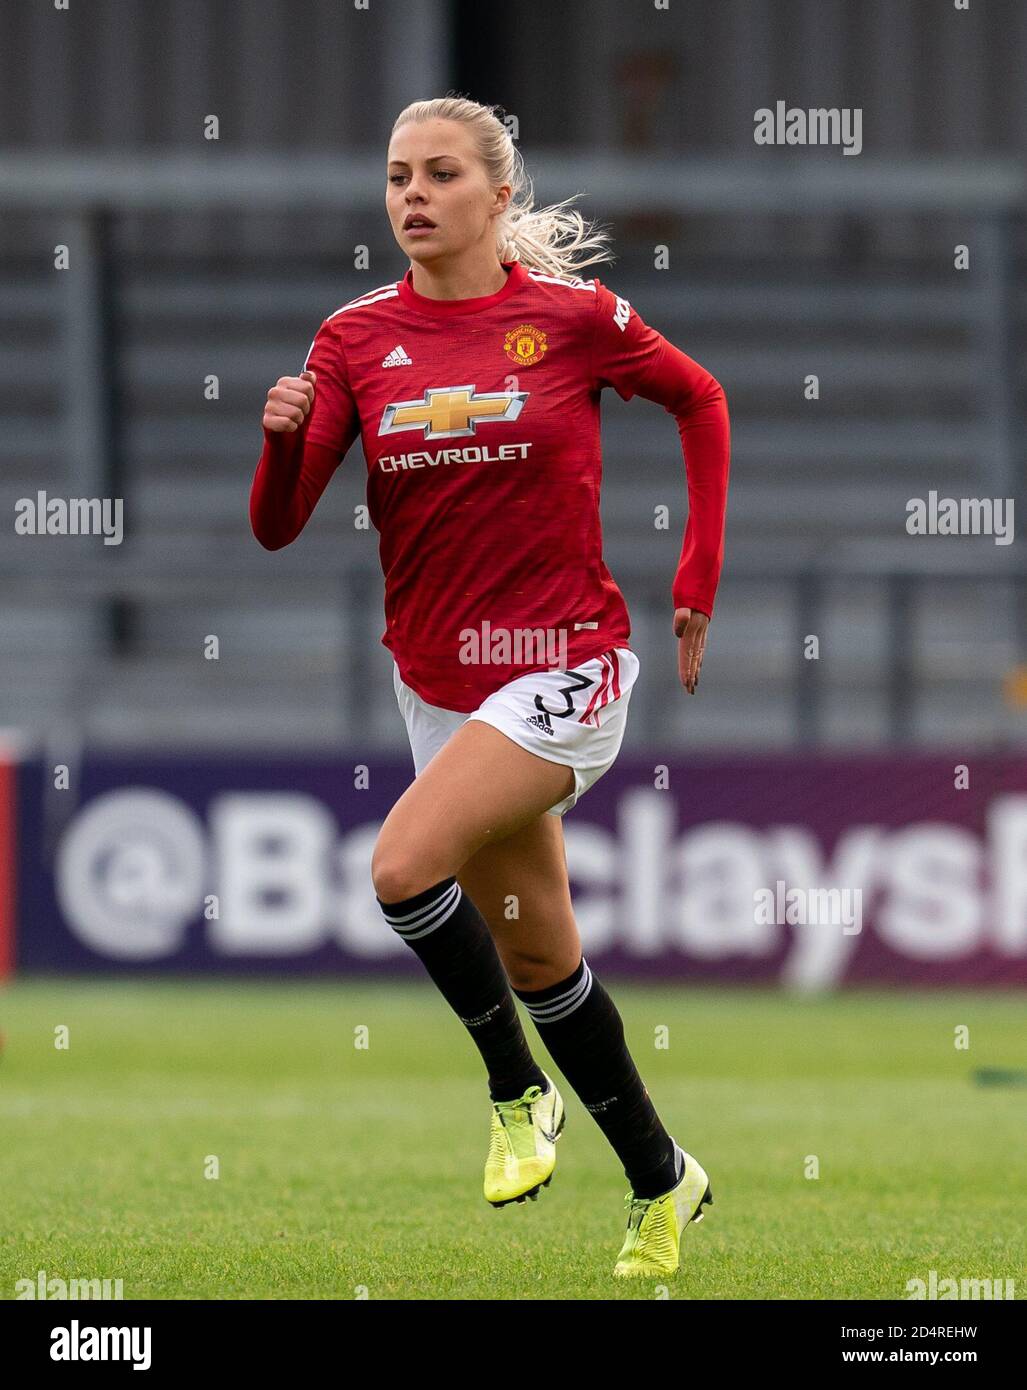 London, UK. 10th Oct, 2020. Lotta …kvist of Man Utd Women during the FAWSL match between Tottenham Hotspur Women & Manchester United Women at The Hive, London, England on 10 October 2020. Photo by Andy Rowland. Credit: PRiME Media Images/Alamy Live News Stock Photo